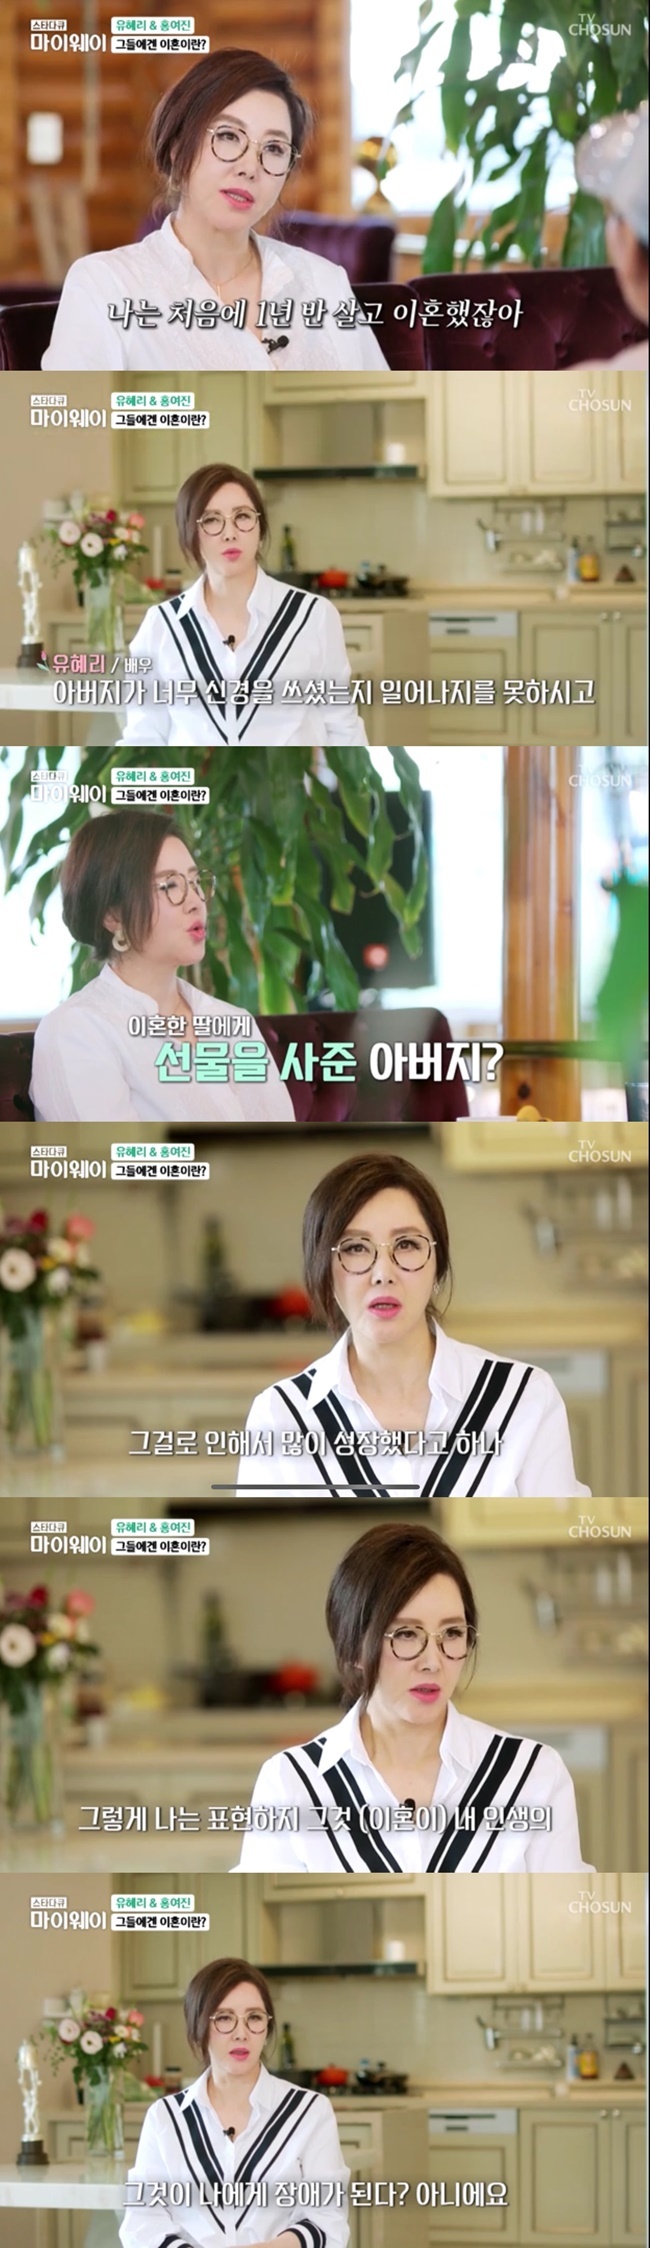 Actor Yoo Hye-ri has spoken out about Lee Geun-hee and Divorce.On the TV ship Star Documentary Myway (hereinafter referred to as My Way) broadcast on August 15, Yoo Hye-ri was pictured meeting Hong Yeo-Jin.Yoo Hye-ri father had opposed marriage until the marriage ceremony day; Yoo Hye-ri opened the statement, I lived for a year and a half at first and did not divide.I couldnt get up to see if my father was too concerned and I couldnt even hold his hand (marriage day).My little father caught me, and later my youngest son said, My sisters dad drinks at home. He bowed his head and said he was just having a hard time.I was hasty, I think I wasnt careful, he recalled.Yoo Hye-ri said: Divorce is not a wound; it was a divorce, but my father liked it and bought it.I usually say why in the house, but I knew it, it was okay. My father saw it right.Hong Yeo-Jin also suffered from a pain of divorce; Hong Yeo-Jin said: It was hard not only to meet divorce but also other men.I met another man when I had cancer, and he told me I had cancer, so I wanted to break up, and I was so grateful for it, and I always thought that old age should be a man to be comfortable with.But since then, I felt a sense of liberation with the feeling of taking off the tight corset. I did not lean on a man, but I thought I should stand. Yoo Hye-ri said, Sometimes when we are sick or fragile, we think about many things, but I think that we should have someone who is getting older and respectful of each other personally.I think I should learn to get old by myself and empty my body and mind, said Hong Yeo-Jin.Yoo Hye-ri said: Do you say youve gone through well and matured and have grown a lot because of it? Ill put it that way. I dont think its a blemish in my life.I can meet anyone and marriage it, but it is a choice. Now I know what marriage is, and I can distinguish it.Meanwhile, Yoo Hye-ri marriages actor Lee Geun-hee in 1994 but decided to divorce in about four years.